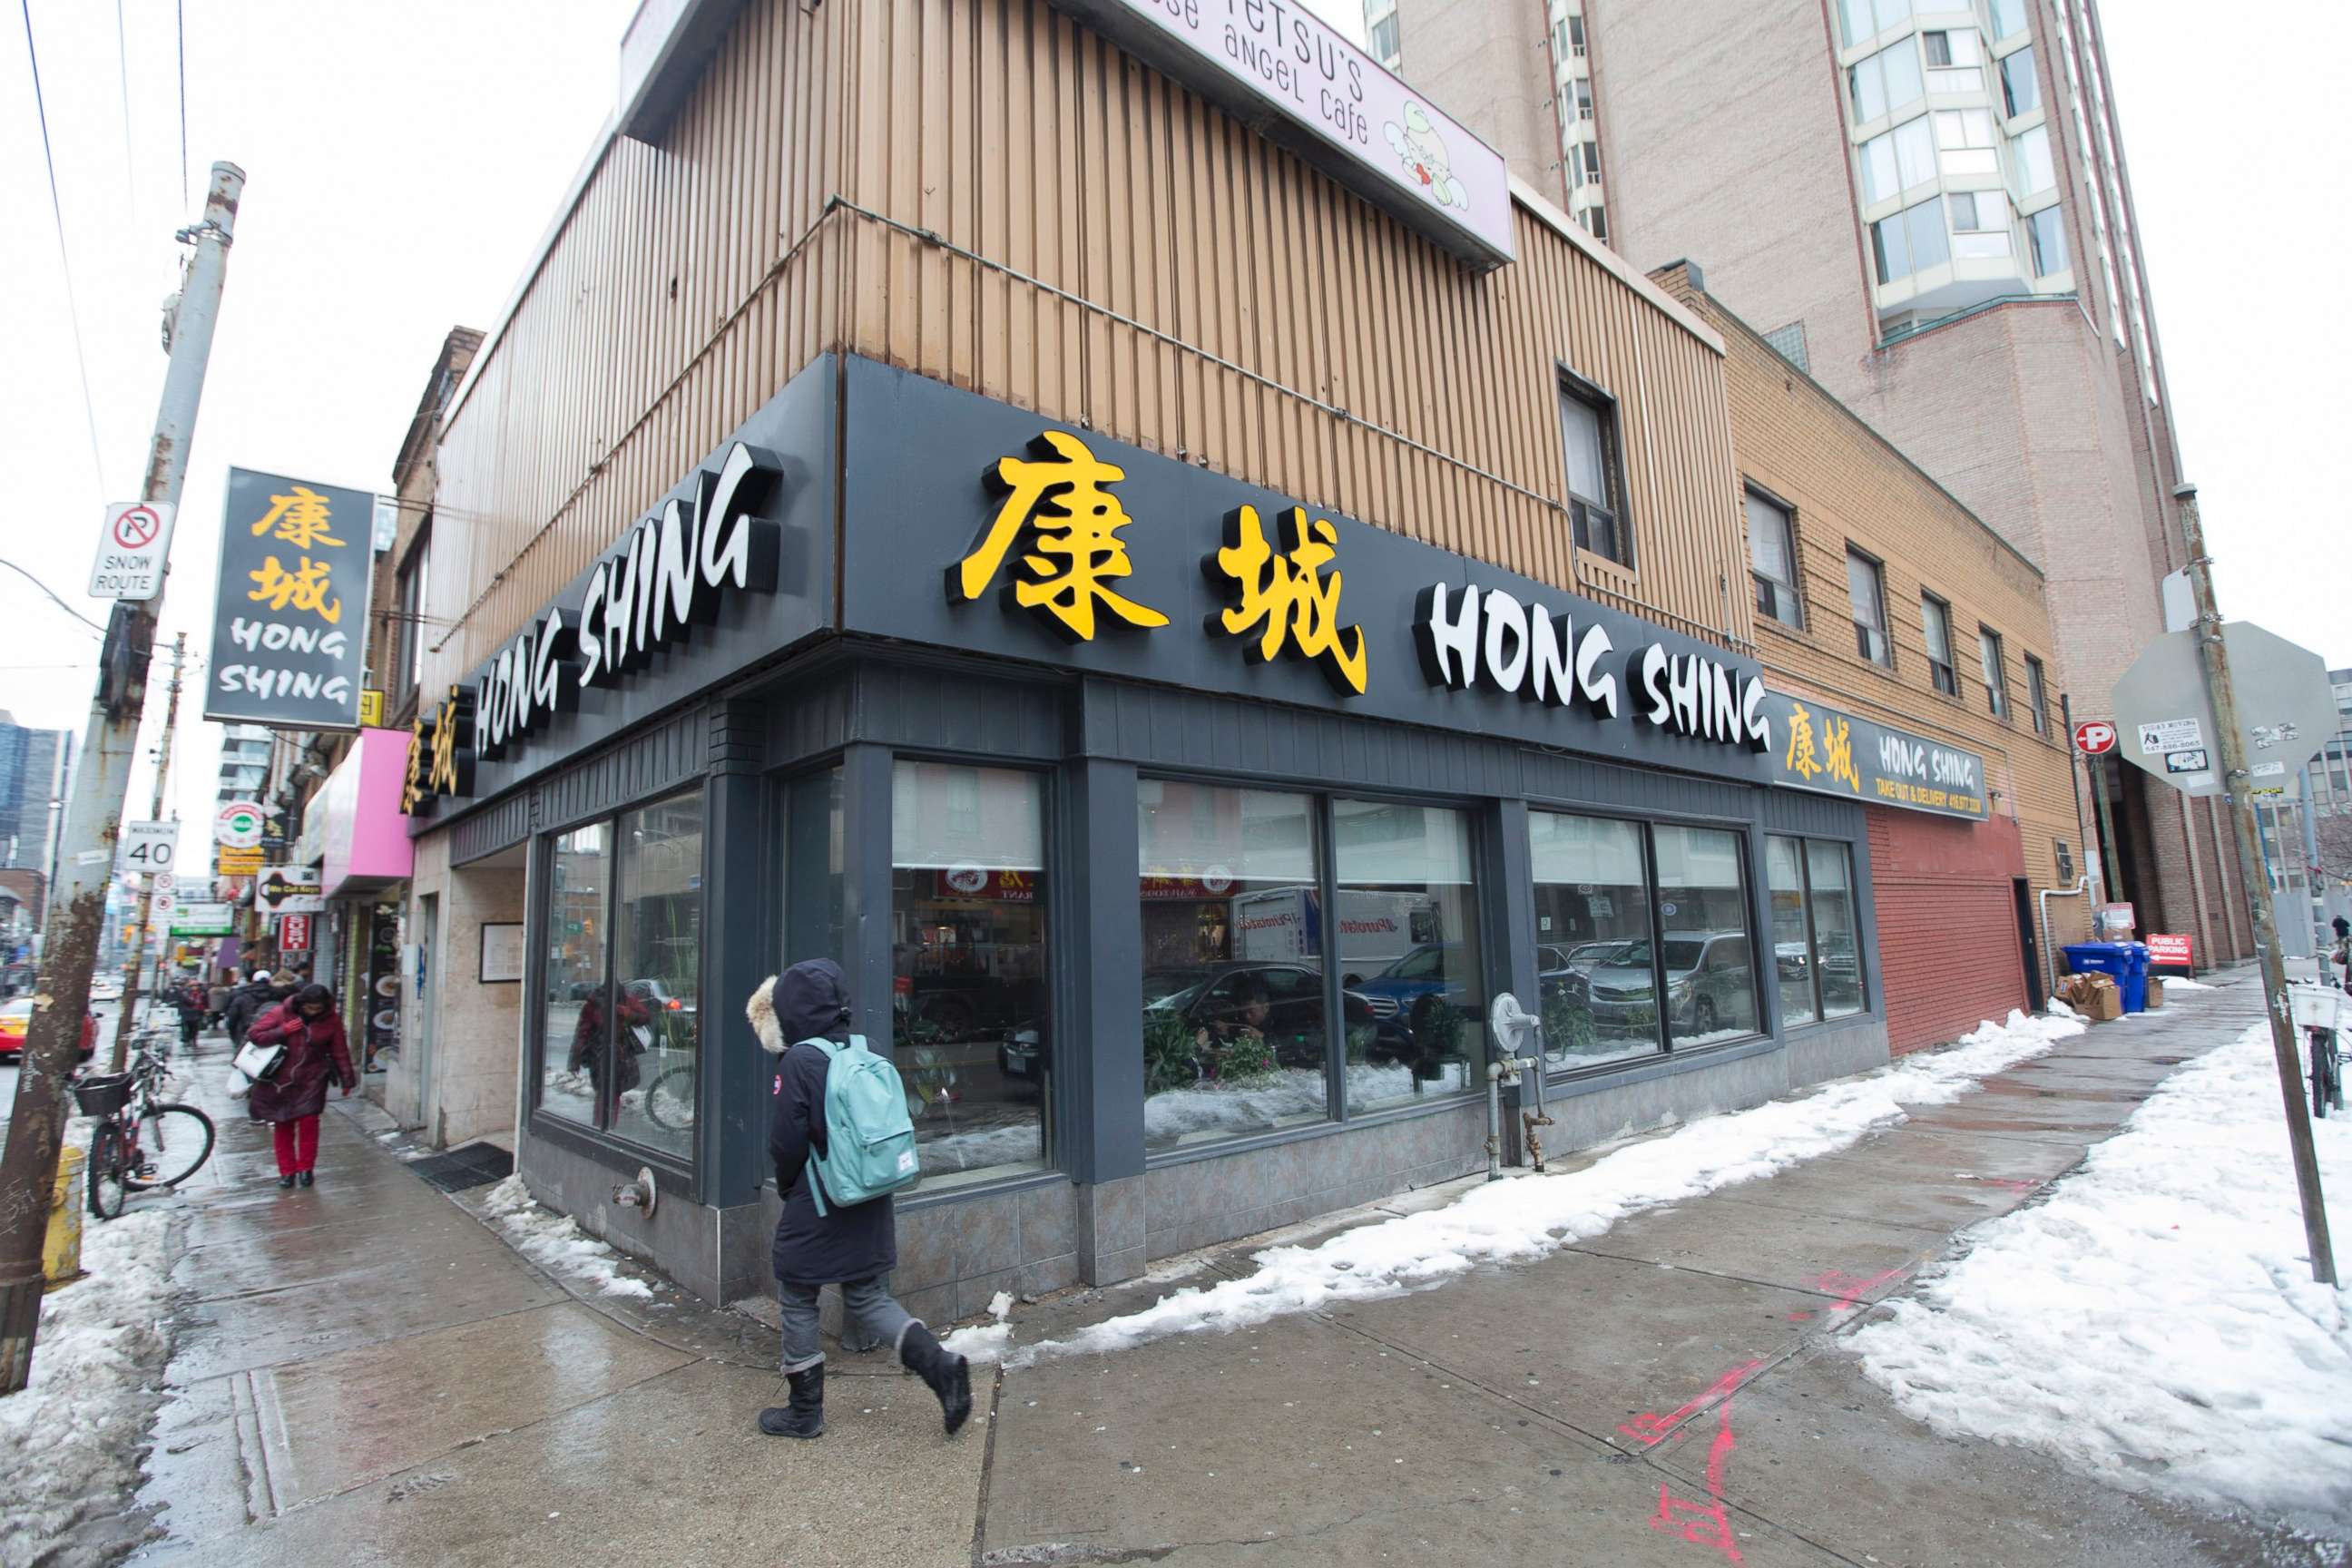 PHOTO: The Hong Shing restaurant in Toronto's Chinatown is pictured on Feb. 14, 2017.